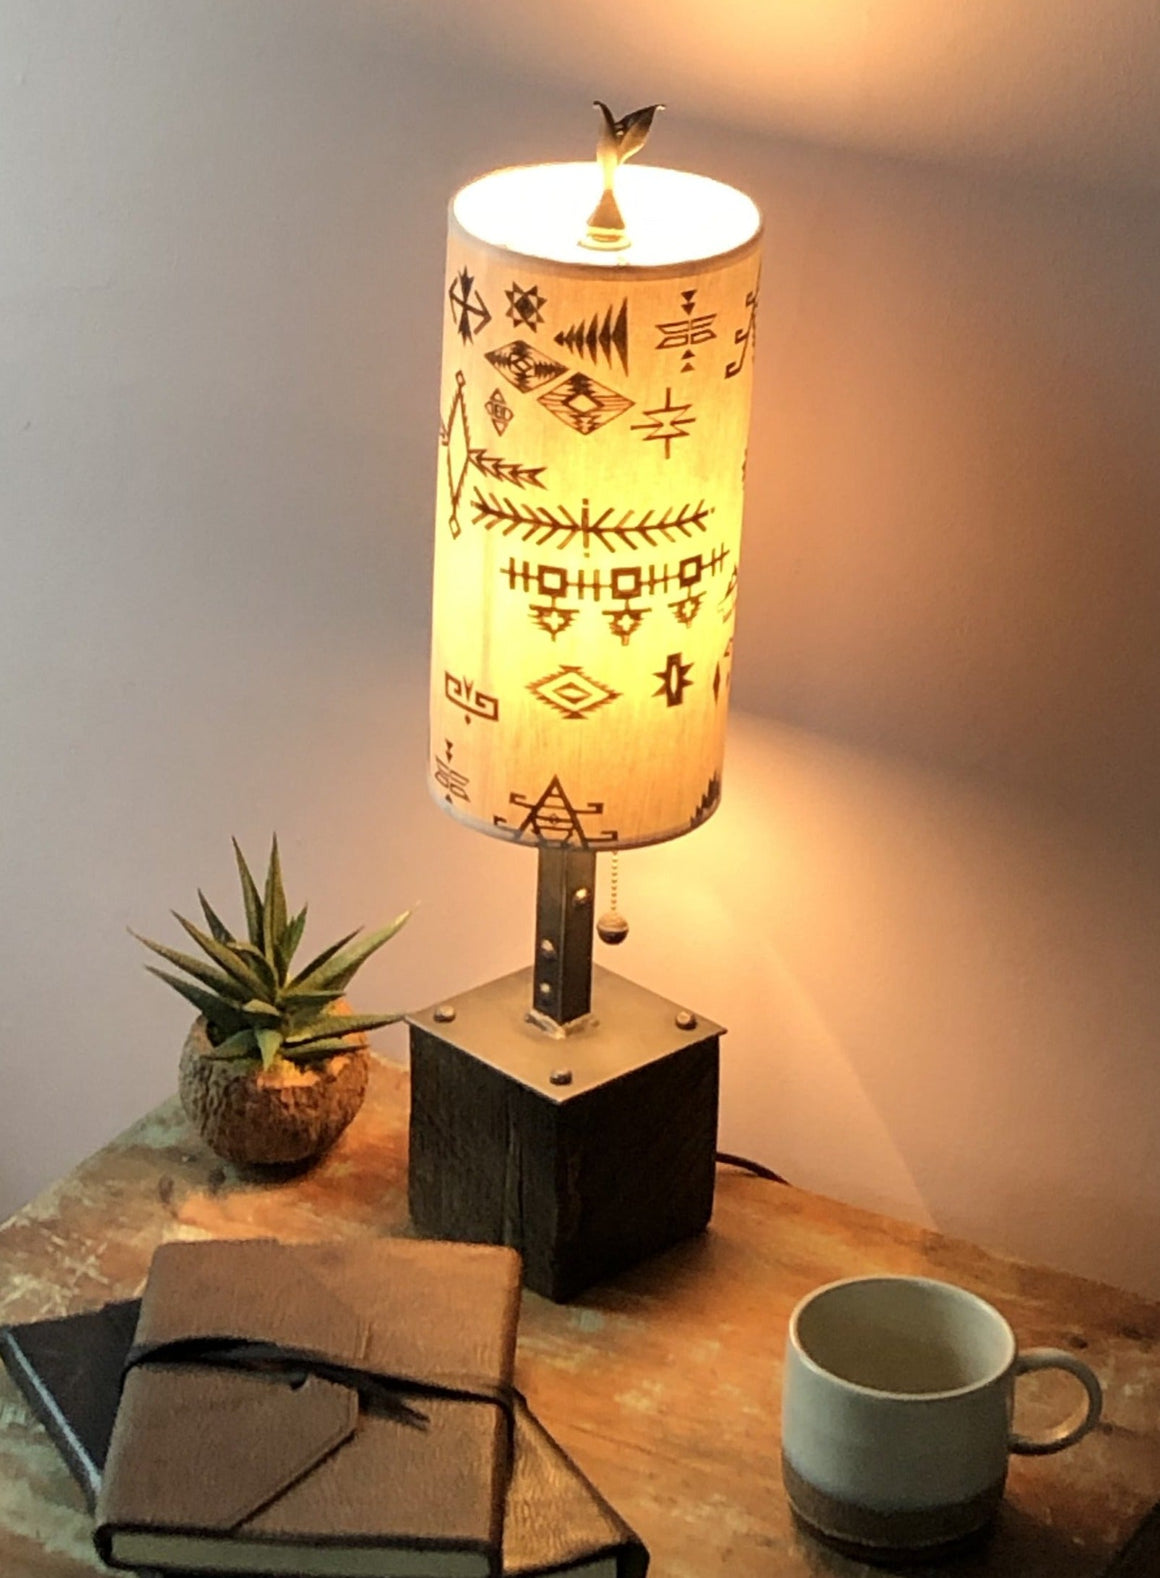 Steel Table Lamp on Reclaimed Wood with Small Tube Shade in Blanket Sketch